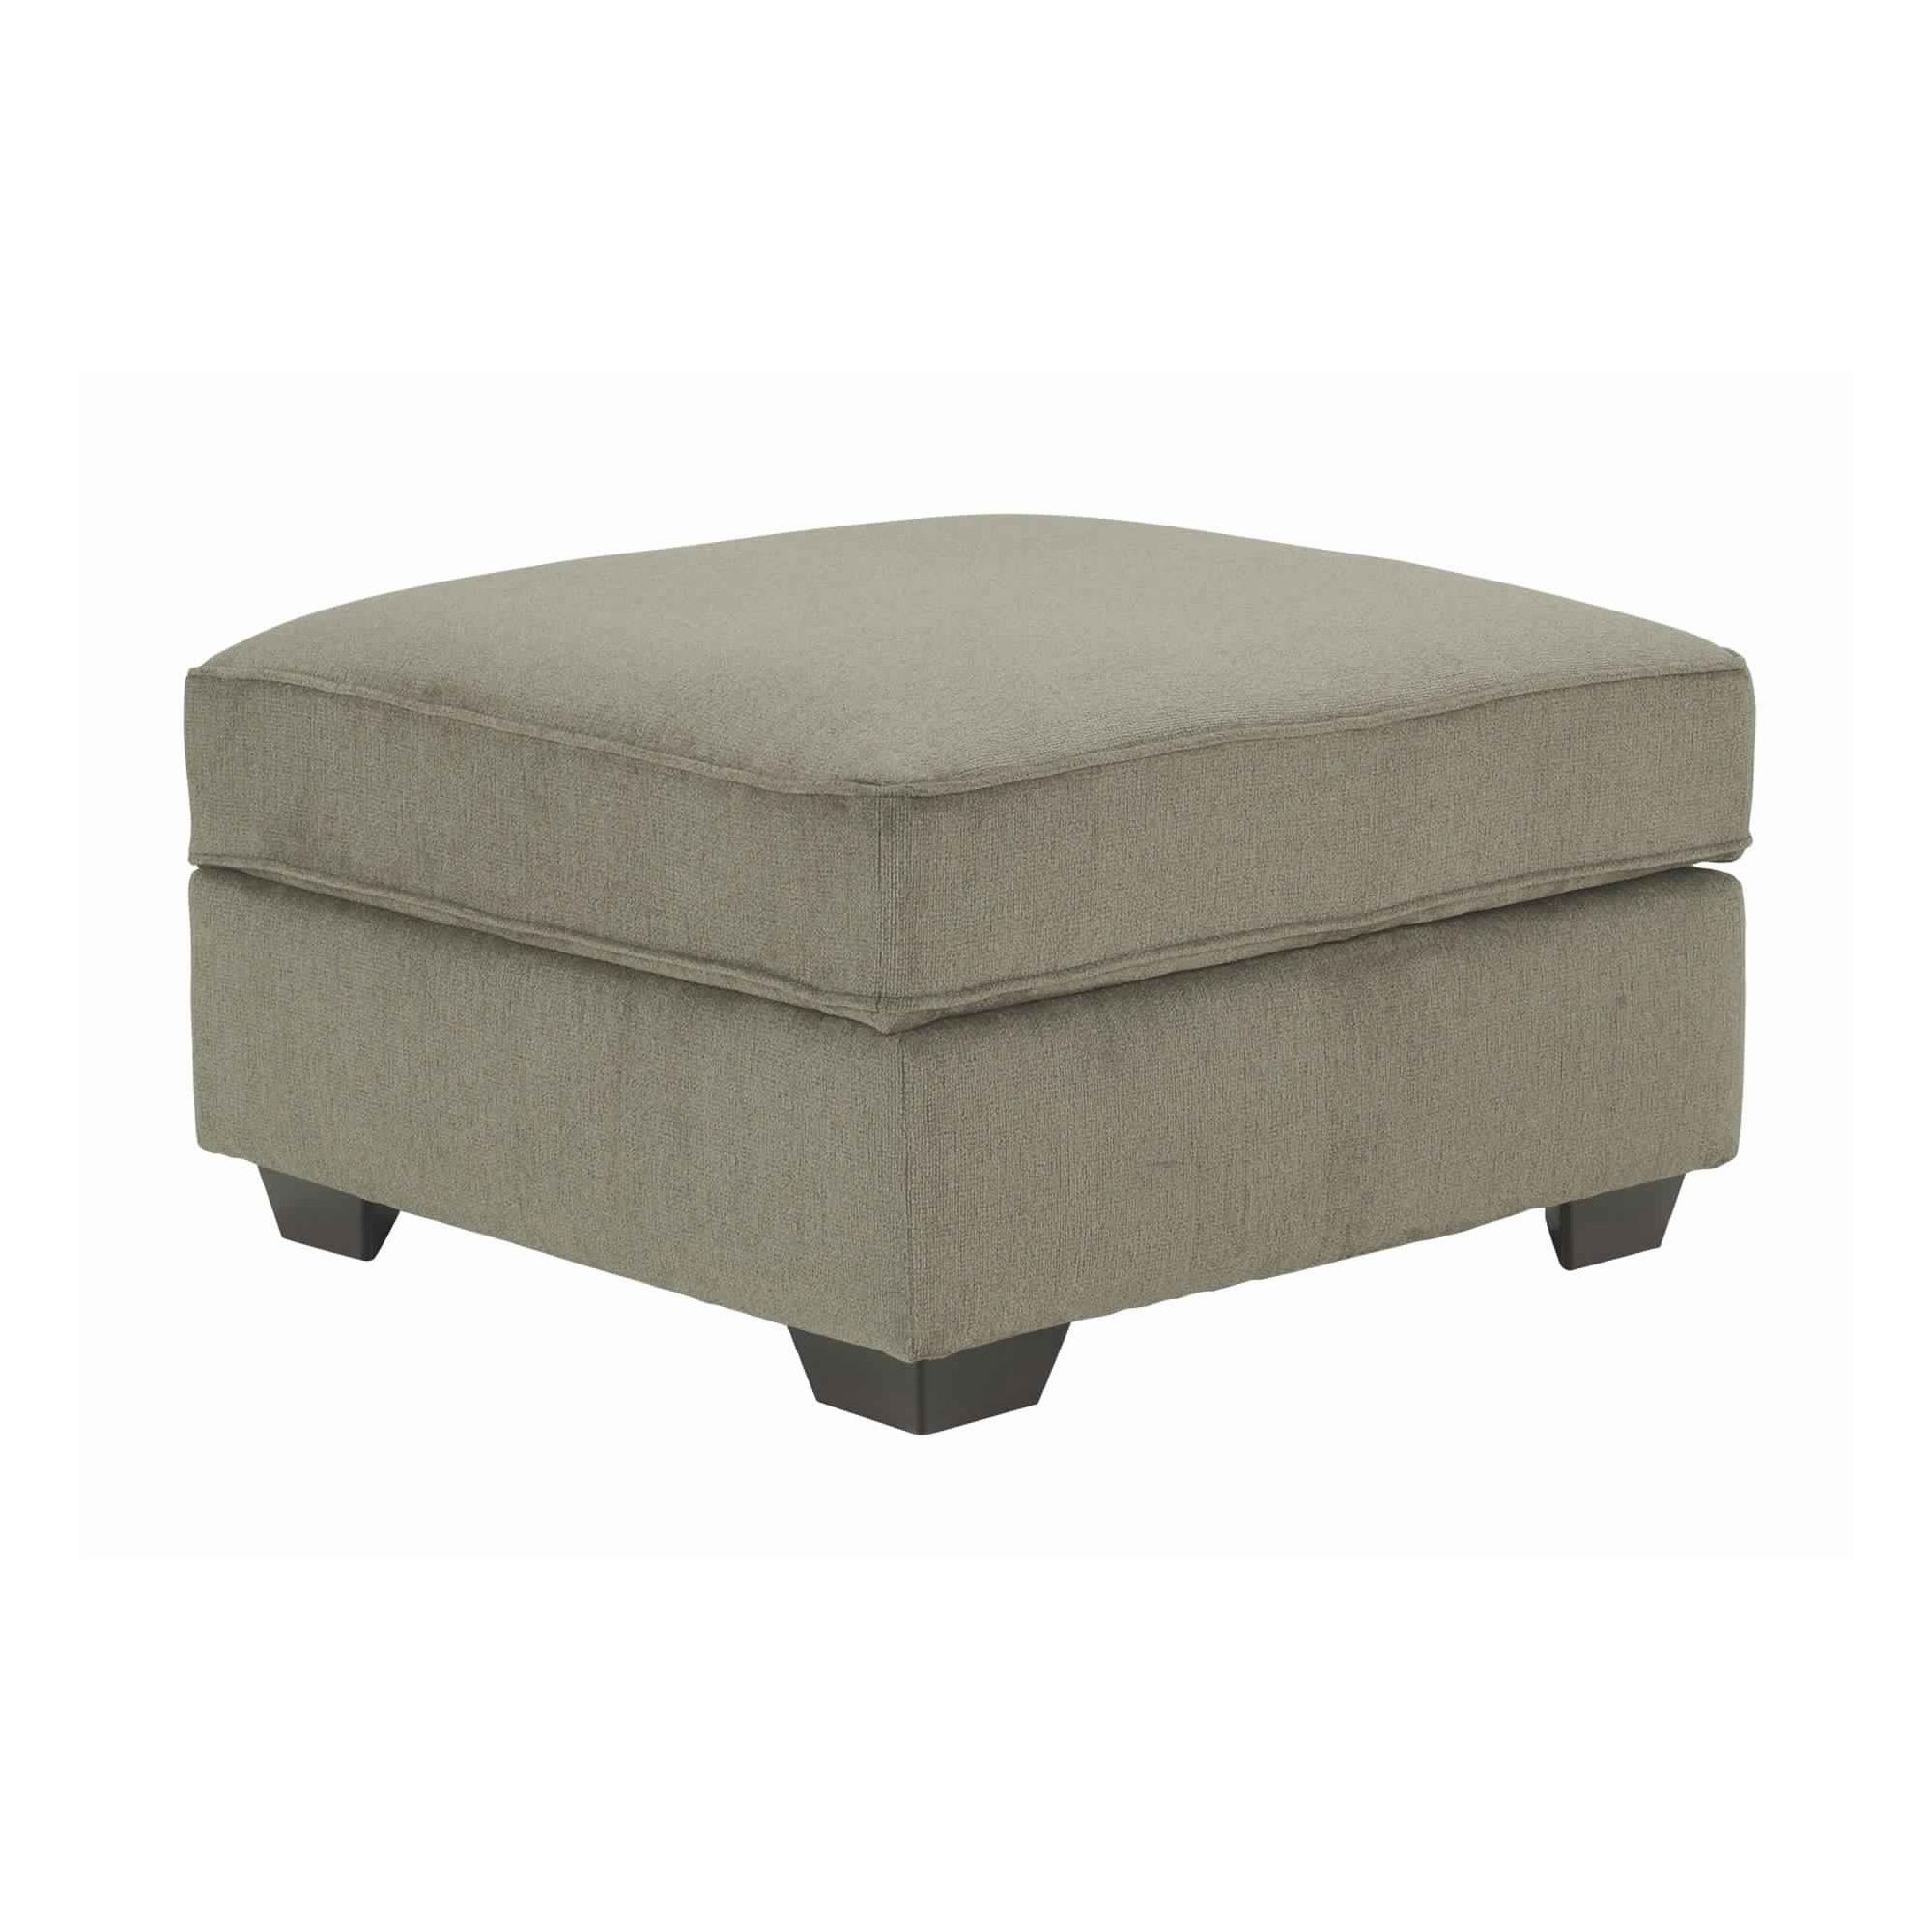 Fabric Upholstered Storage Ottoman With Tapered Legs, Taupe Gray Pertaining To Red Fabric Square Storage Ottomans With Pillows (View 2 of 20)